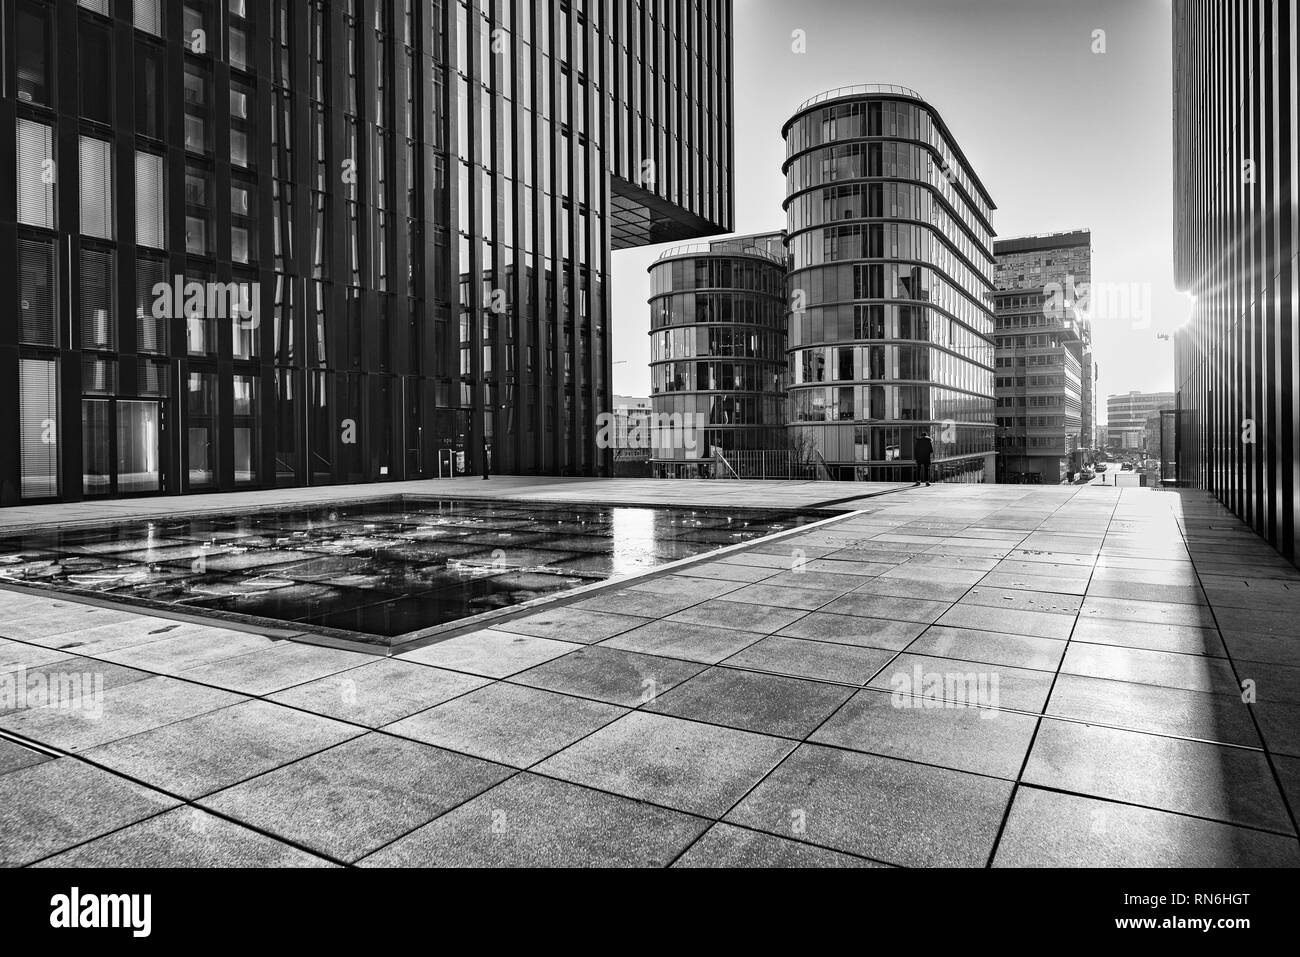 Duesseldorf, GERMANY - January 20, 2019: Modern architecture of New Harbour City throws long and dramatic shadows during sunset captured in B W. Stock Photo